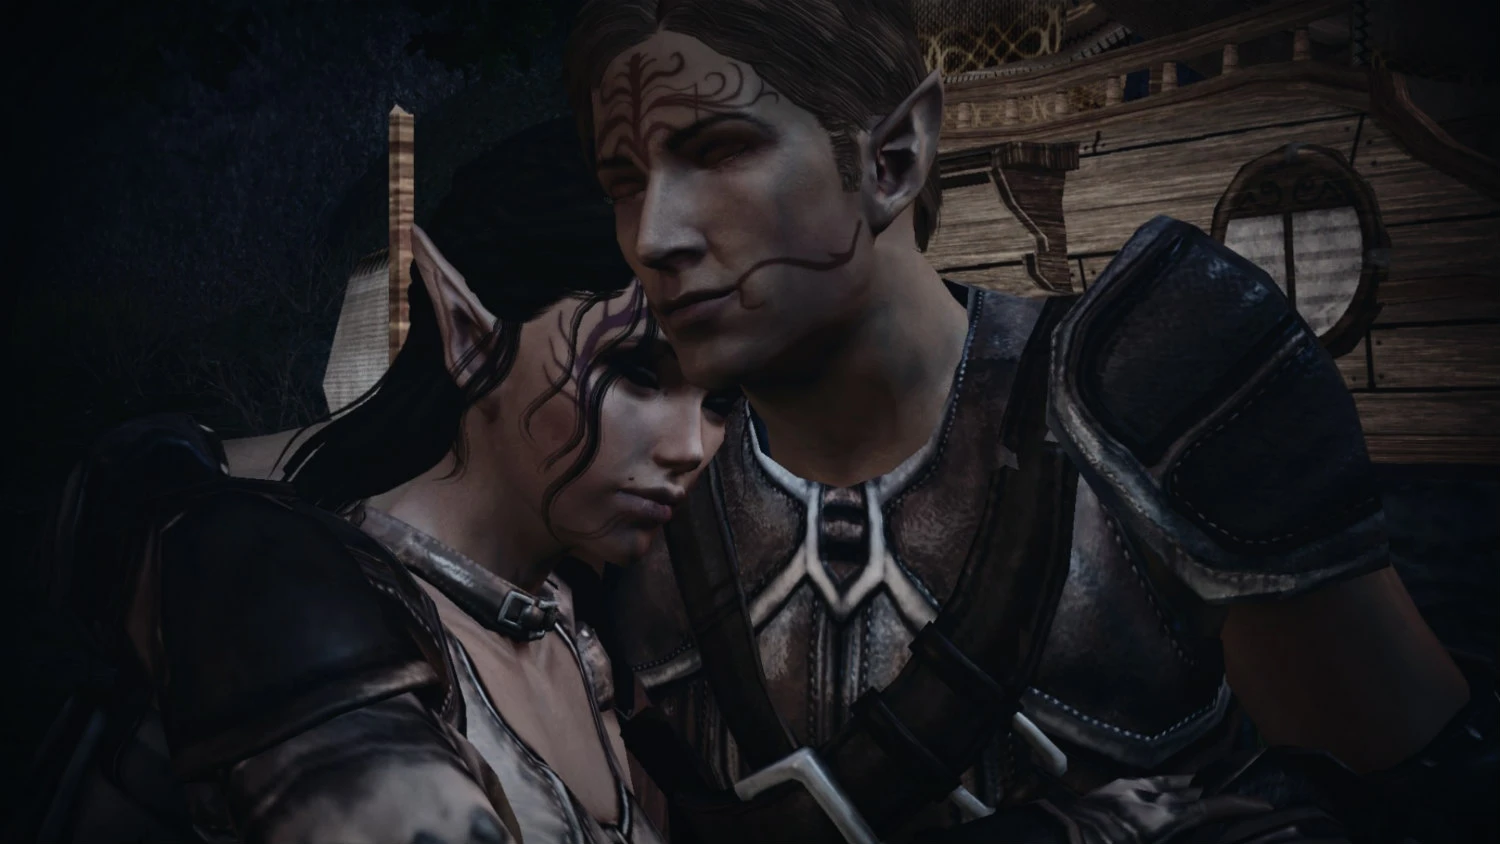 Mahariel and Tamlen at Dragon Age: Origins - mods and community